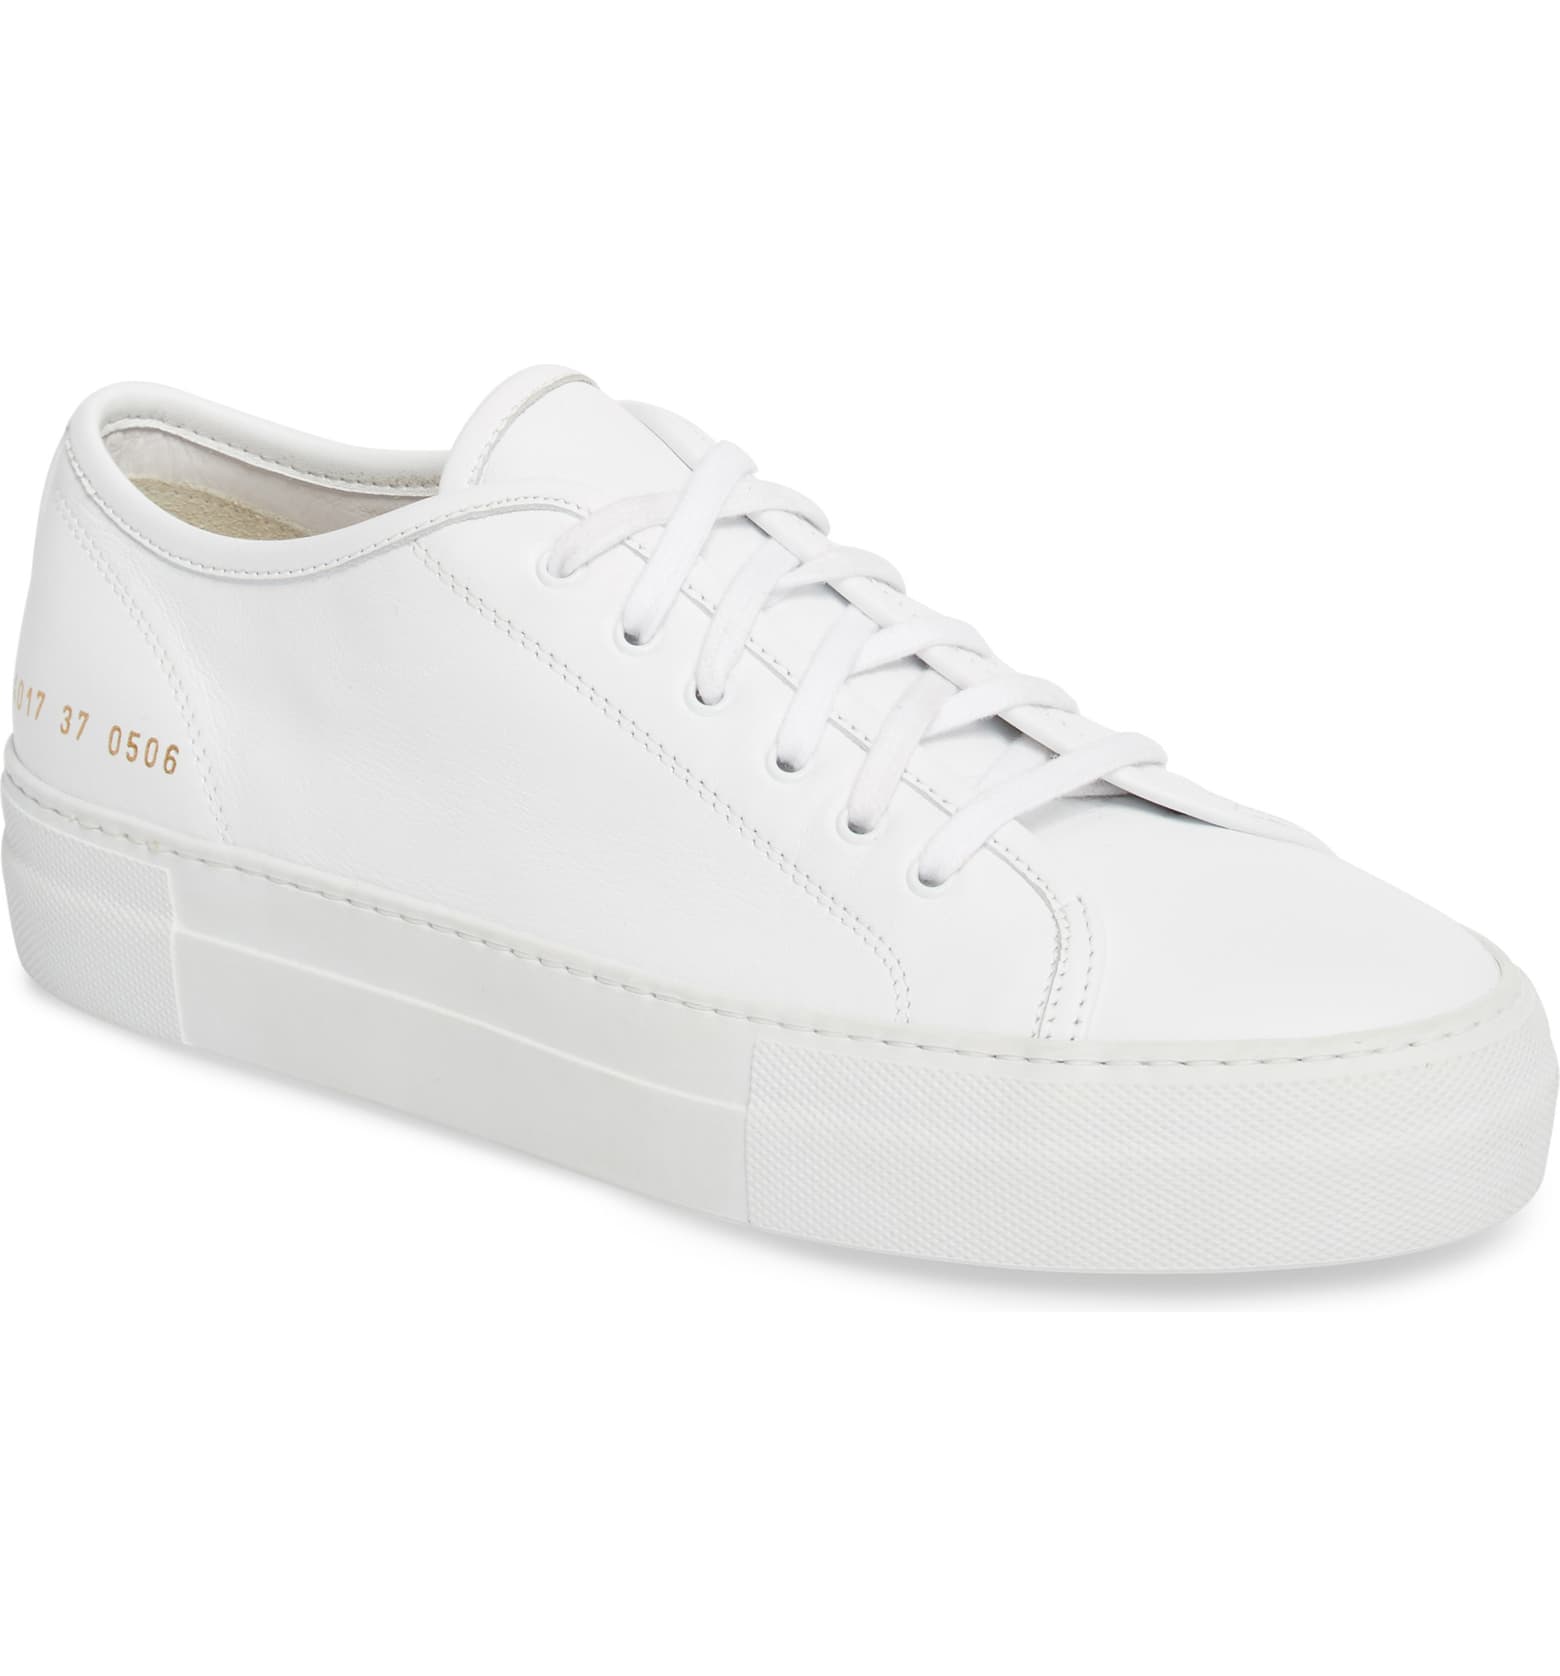 solid white womens tennis shoes